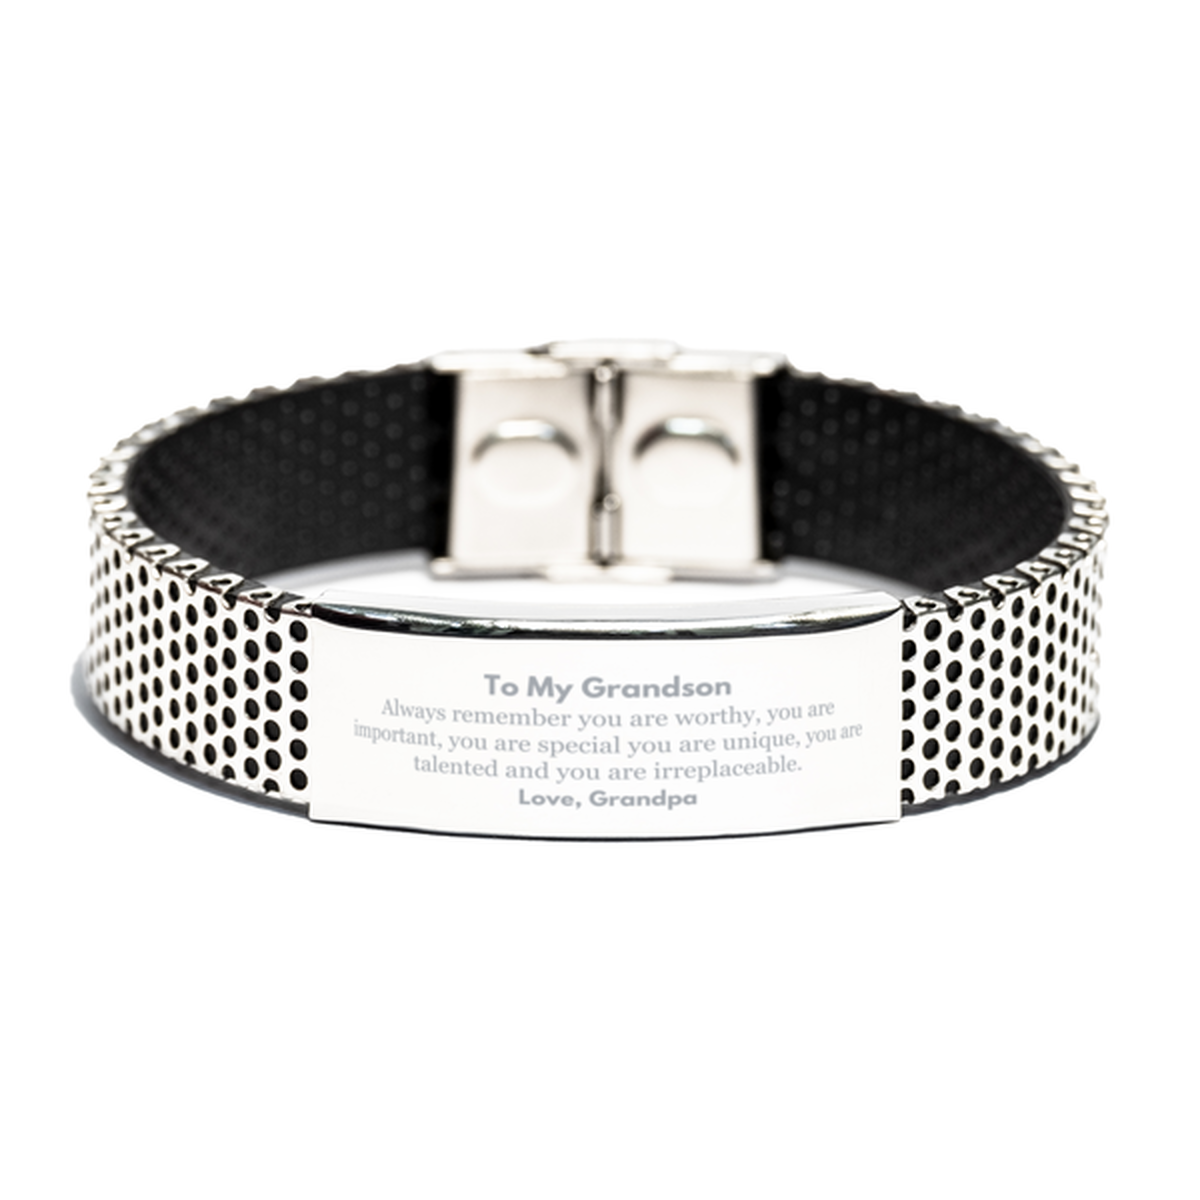 Grandson Birthday Gifts from Grandpa, Inspirational Stainless Steel Bracelet for Grandson Christmas Graduation Gifts for Grandson Always remember you are worthy, you are important. Love, Grandpa